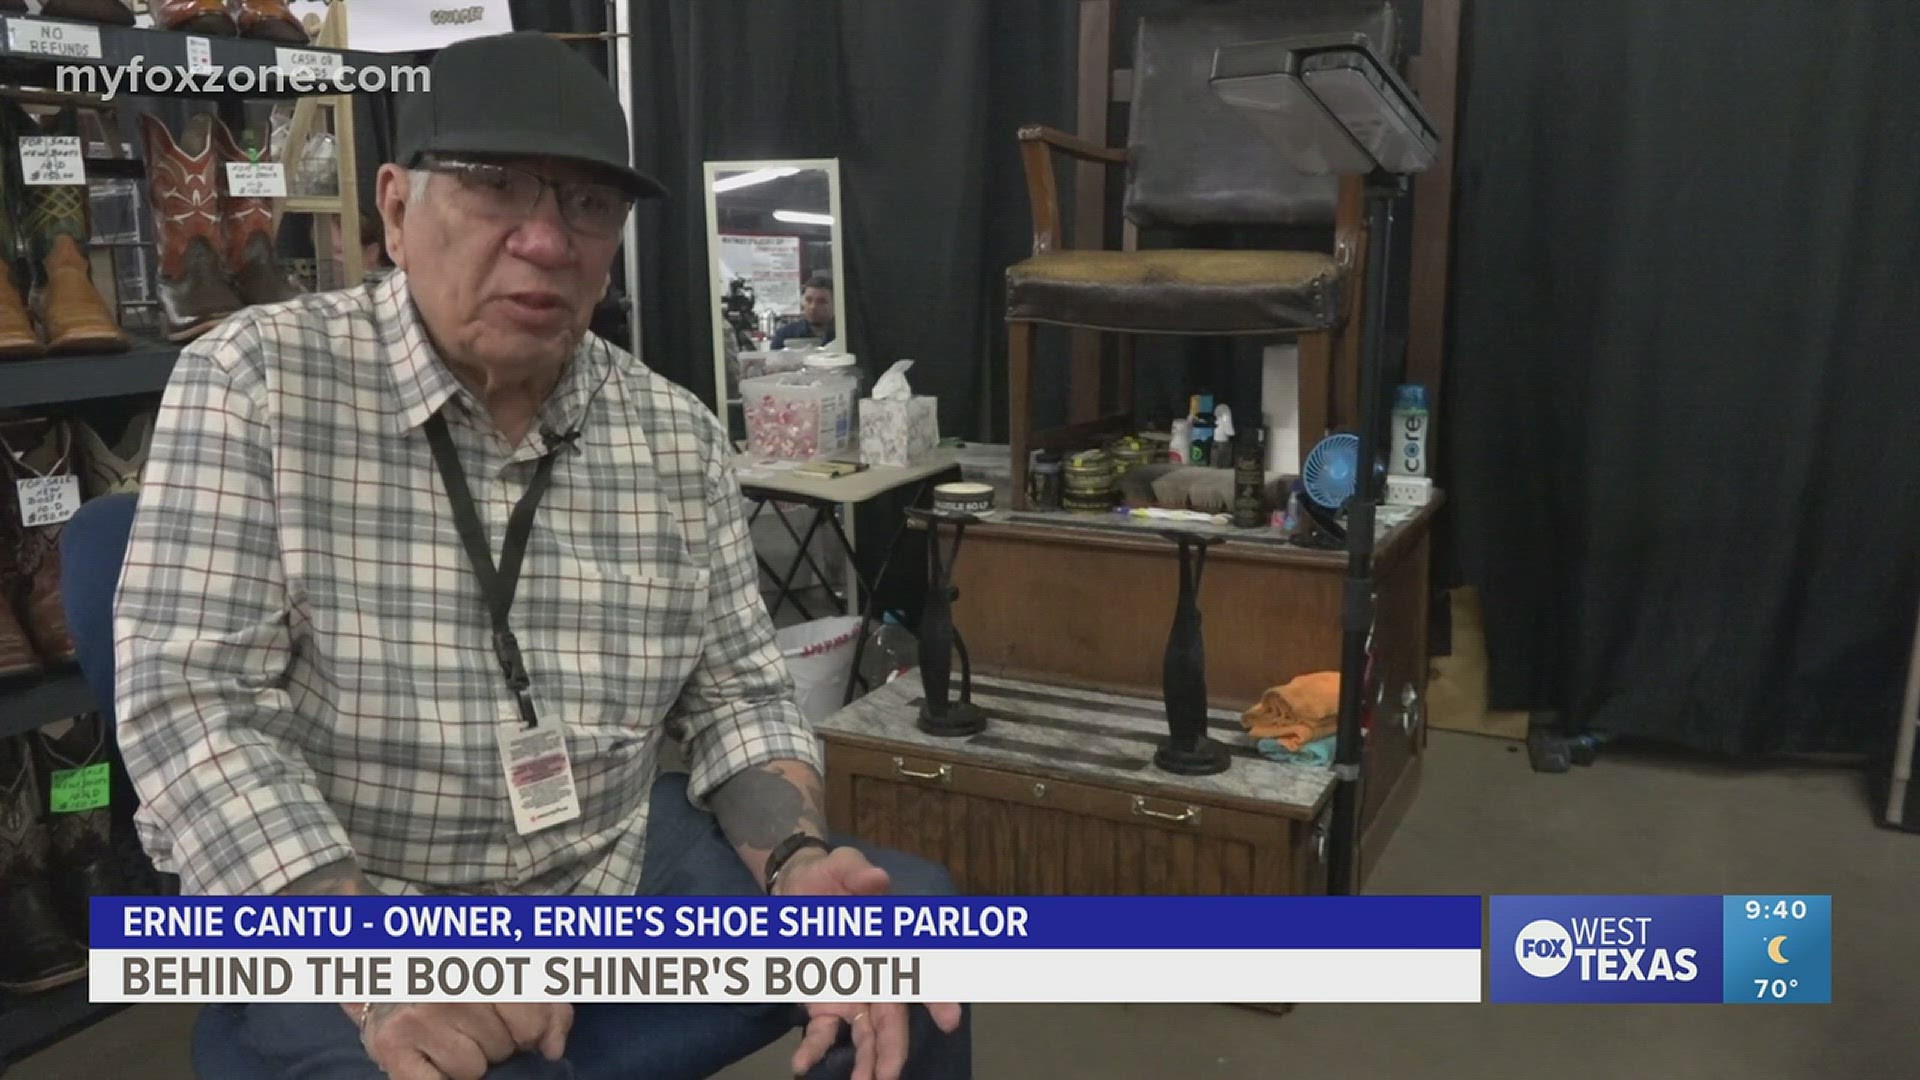 Ernie Cantu has been a staple of the San Angelo rodeo, shining West Texans boots for more than two decades.